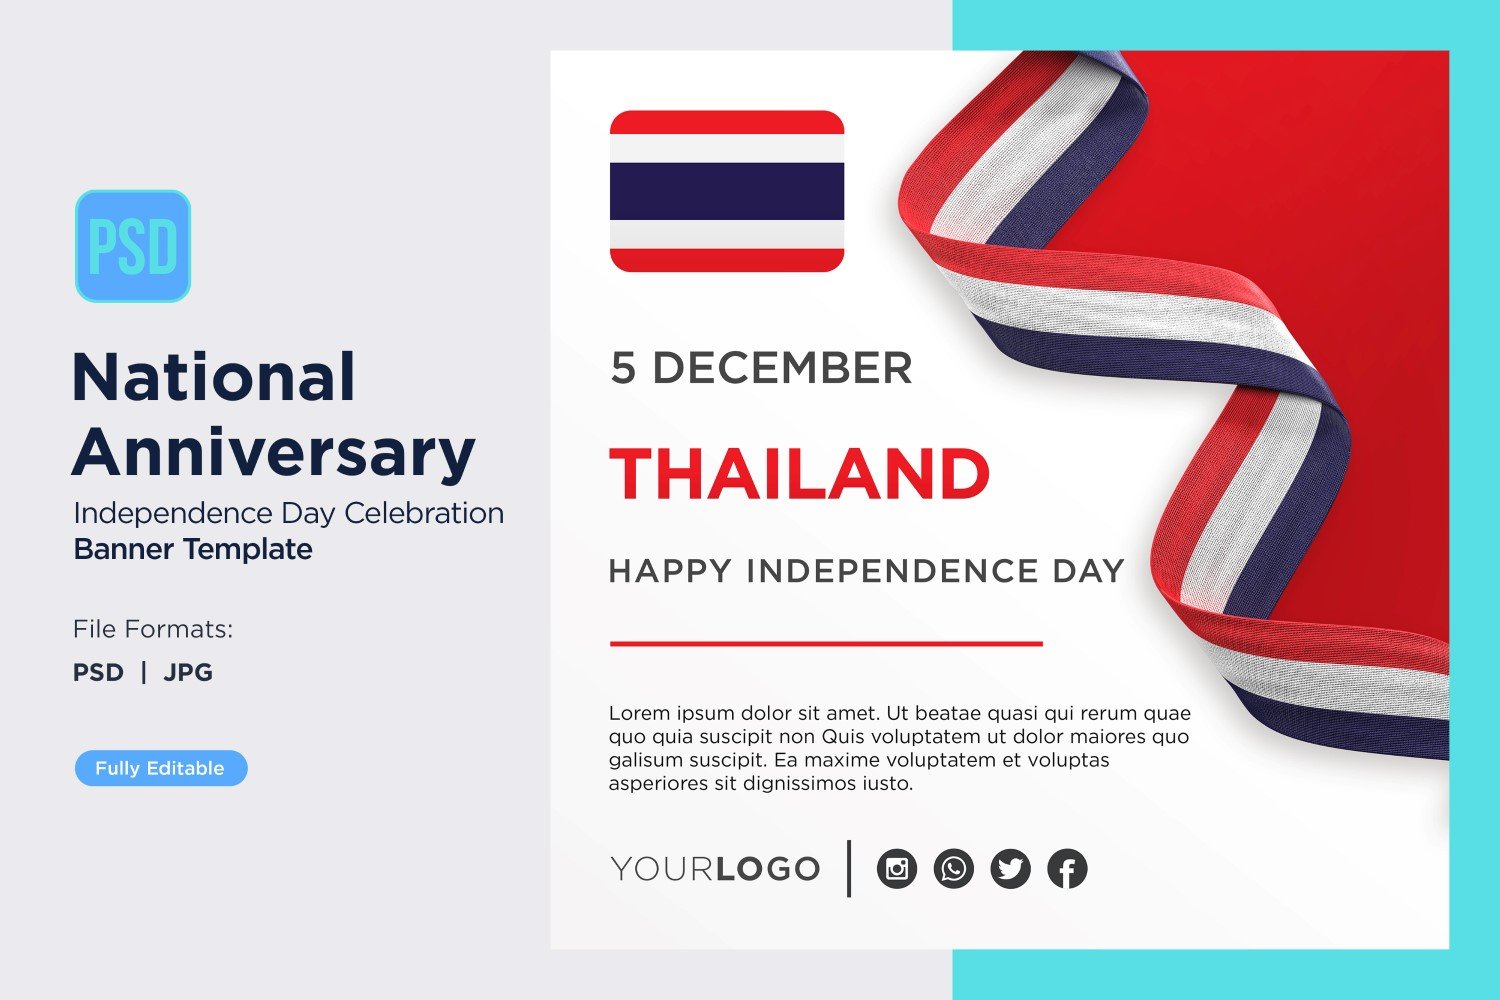 Template #402969 Day Celebration Webdesign Template - Logo template Preview